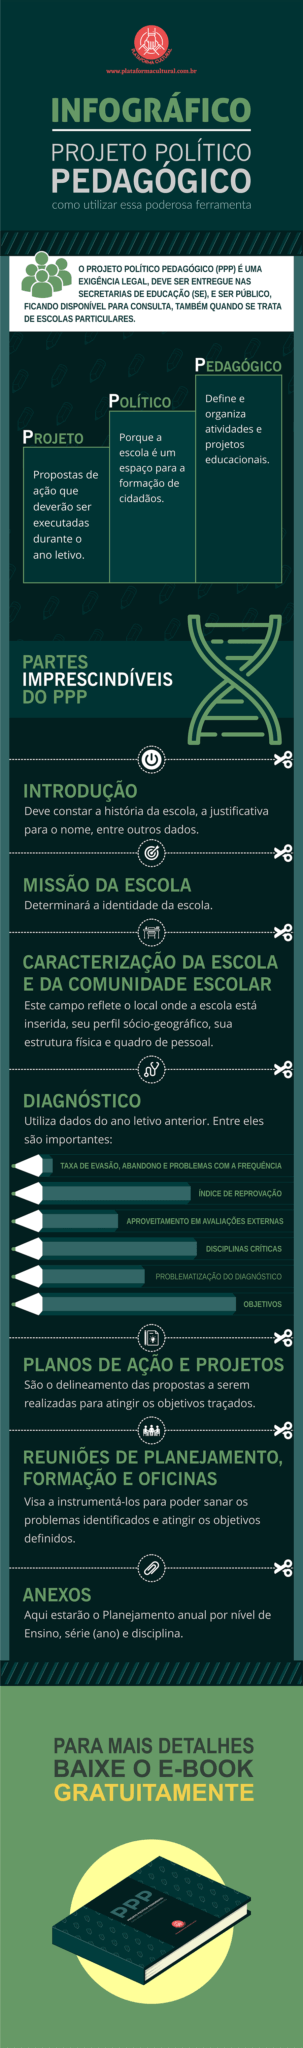 Infográfico PPP